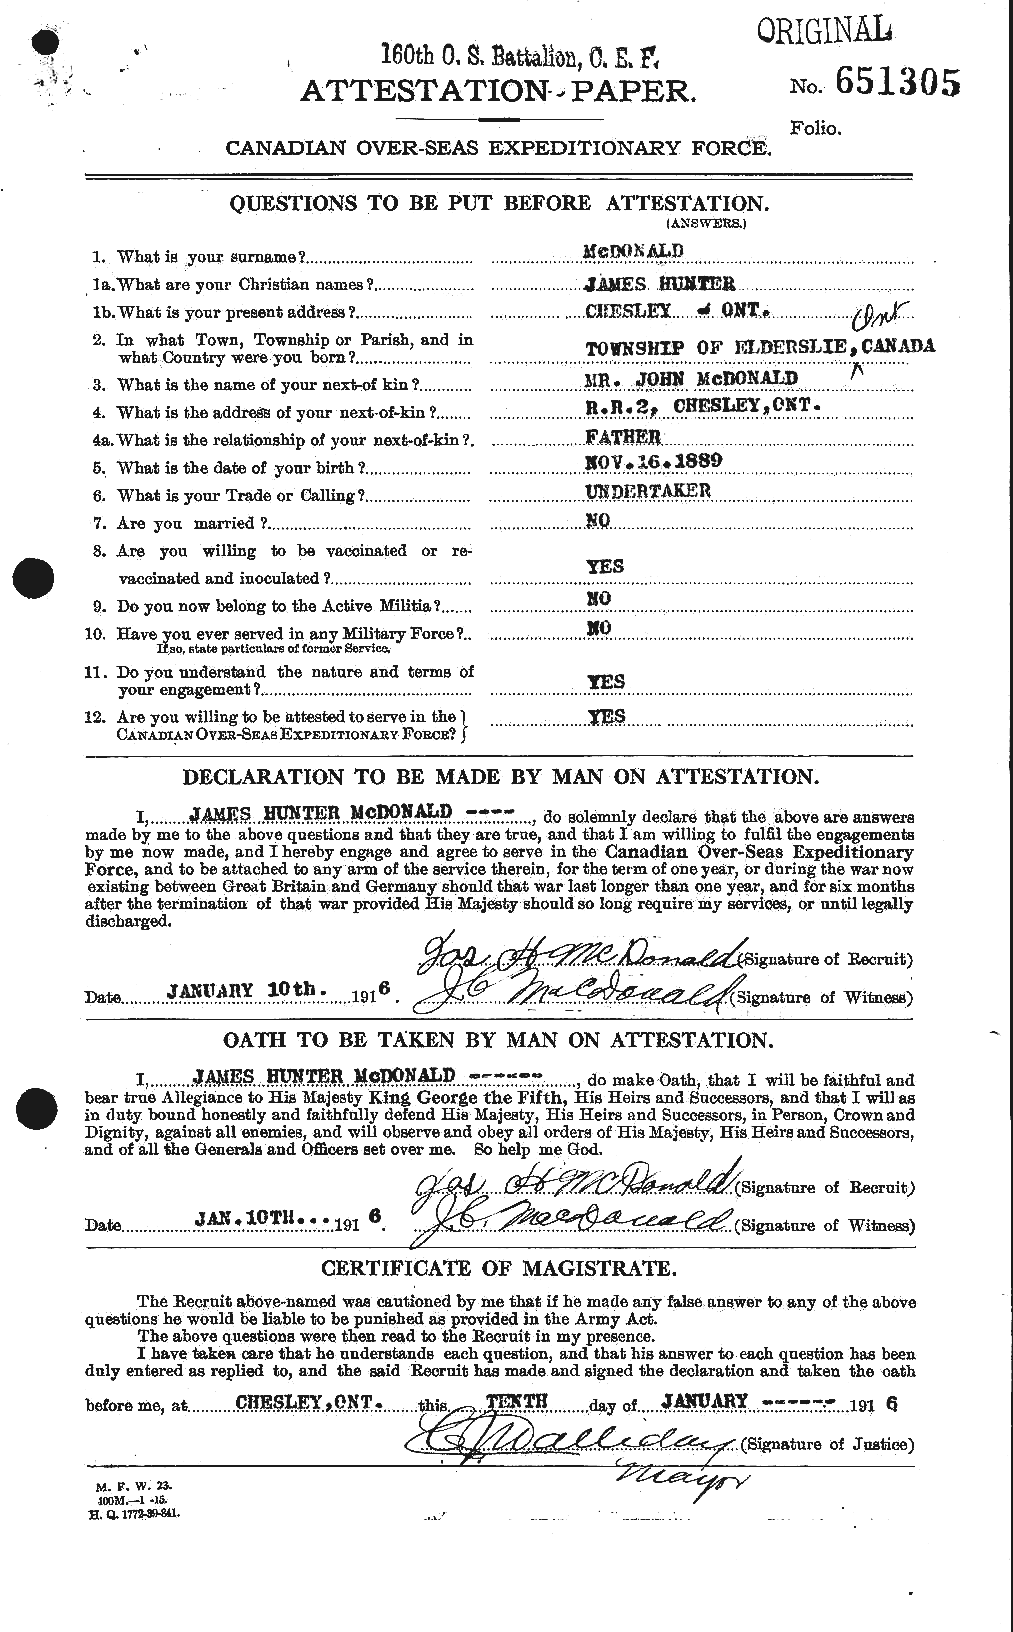 Personnel Records of the First World War - CEF 522404a